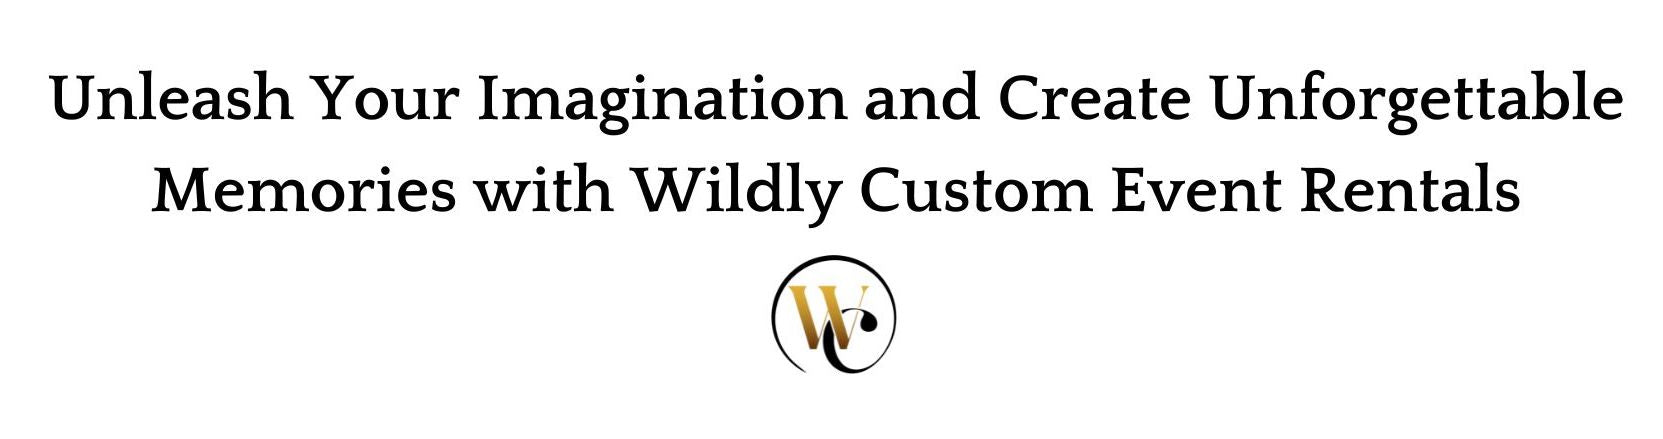 Unleash Your Imagination and Create Unforgettable Memories with Wildly Custom Event Rentals